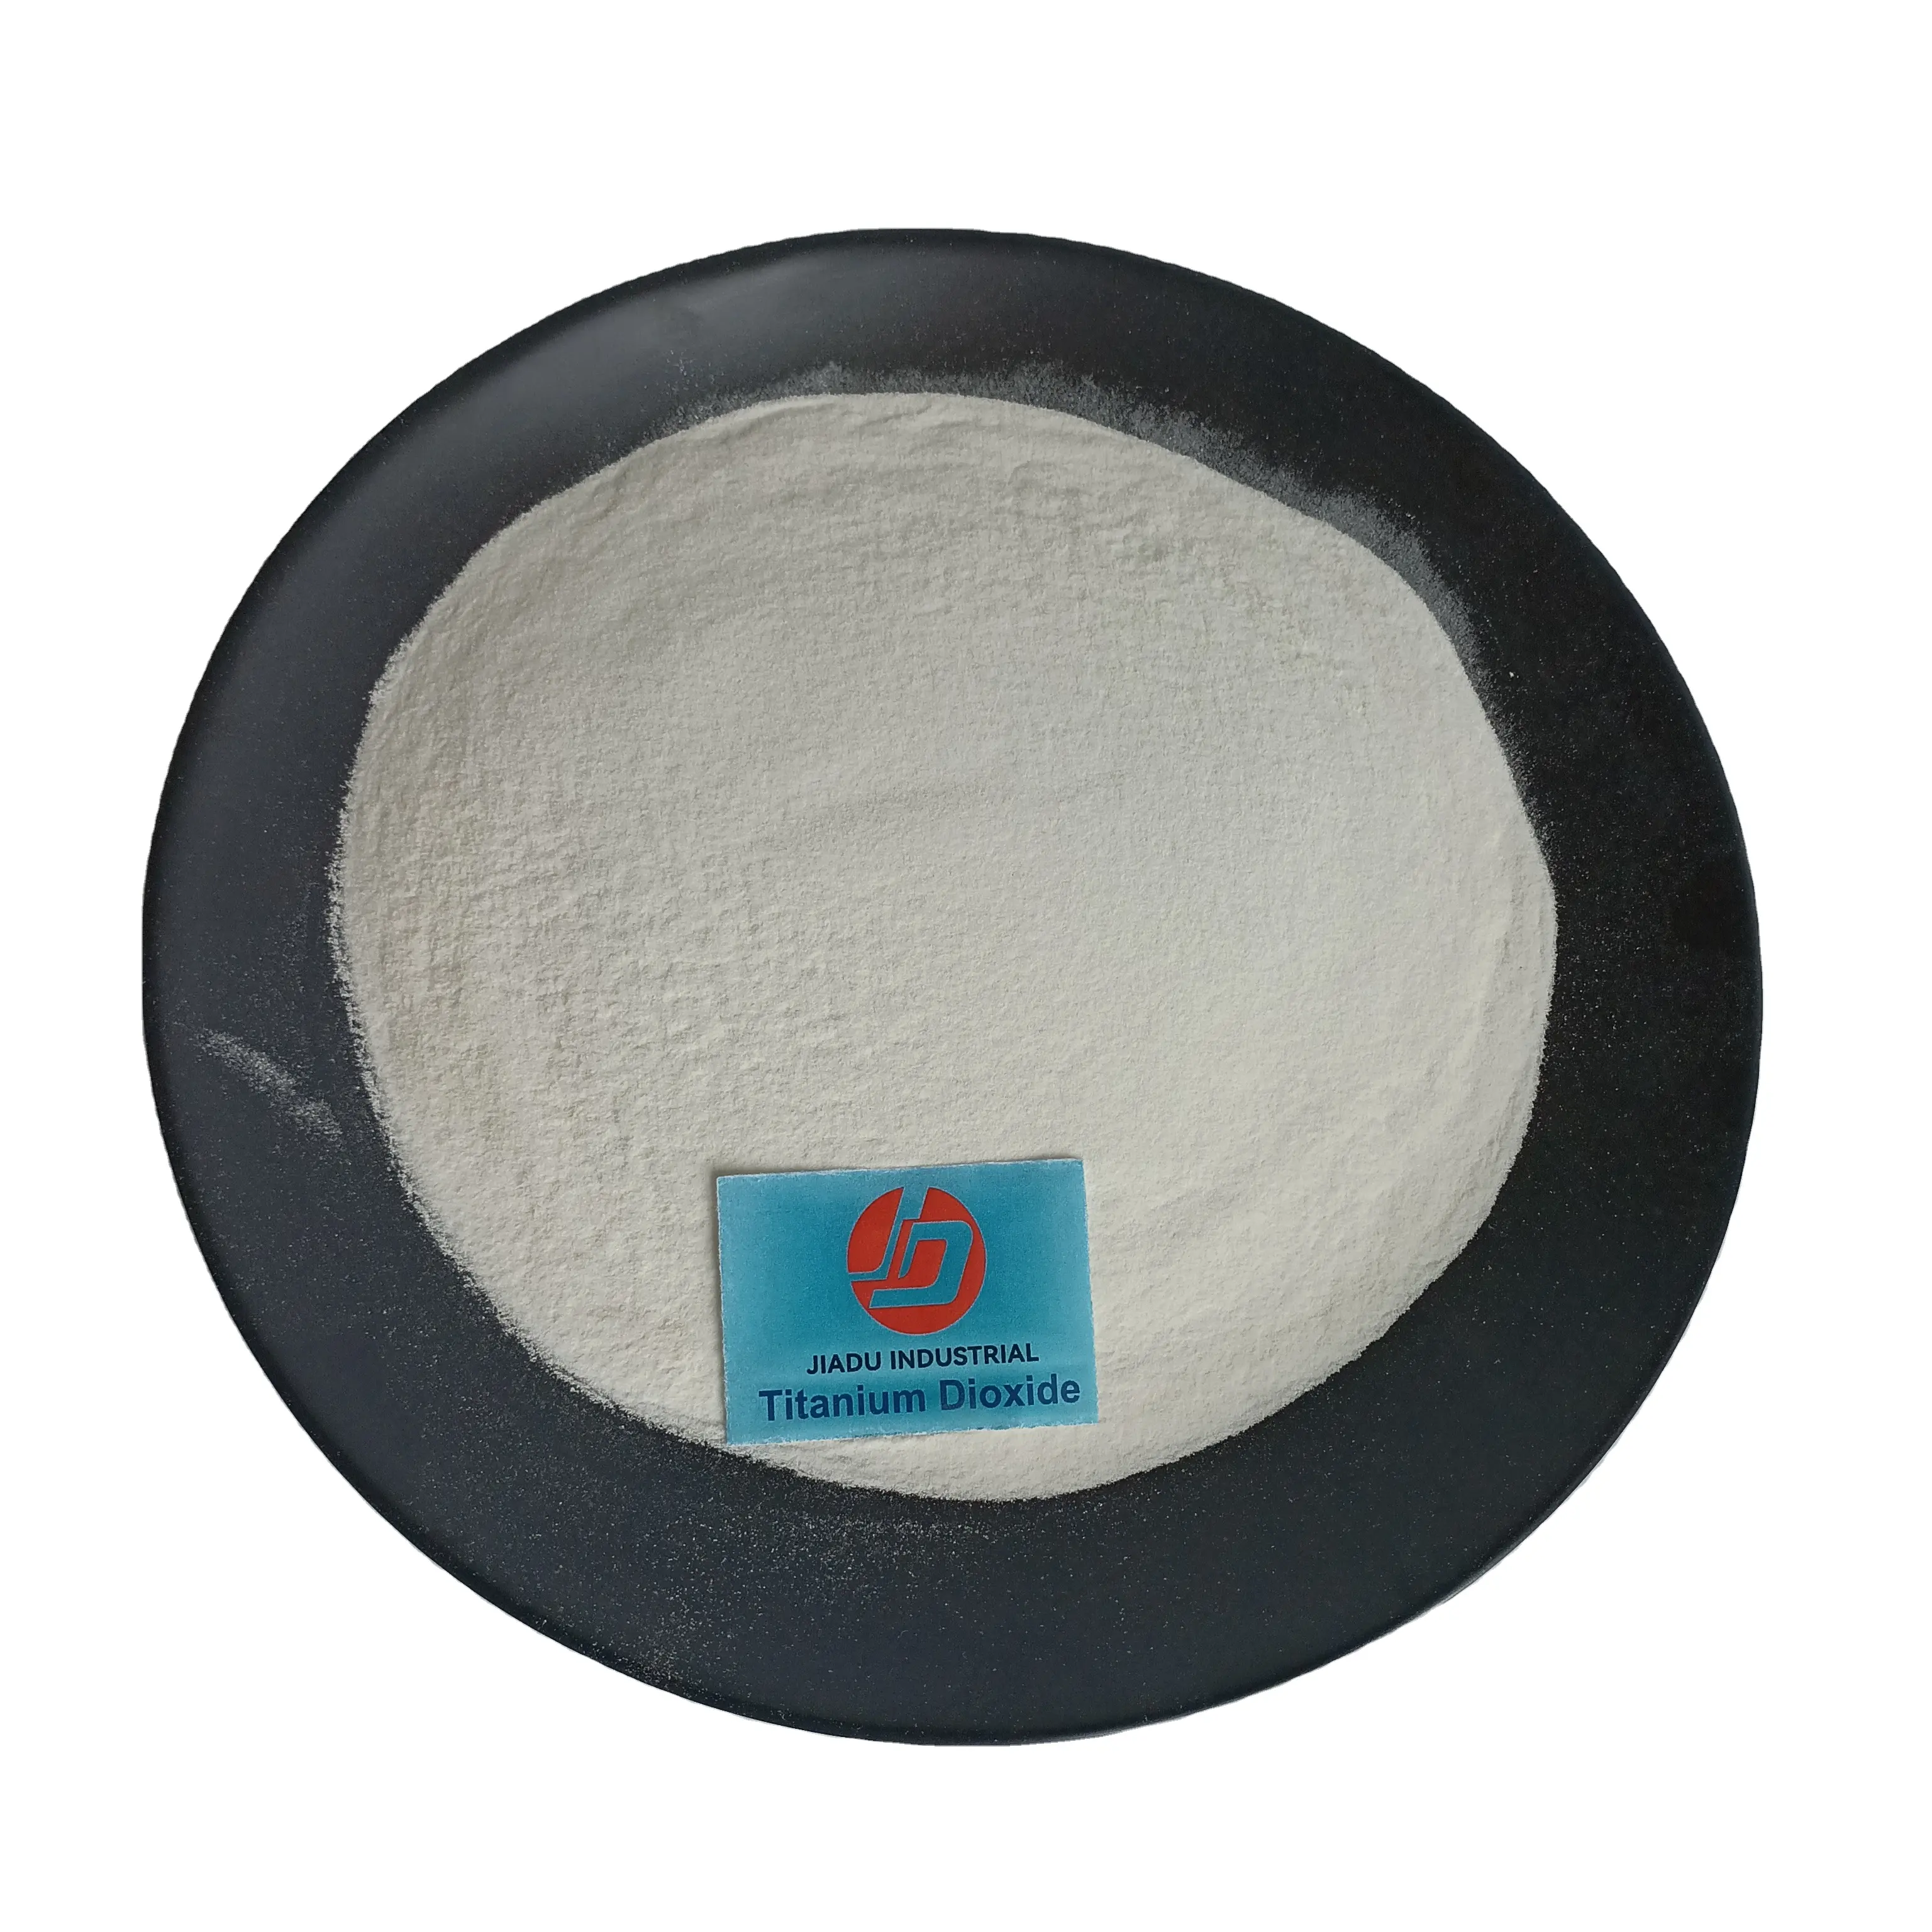 Raw Chemical Materials for Paint,dyes,plastics,rubber Products,cosmetics Titanium Dioxide White Powder Inorganic Pigment Tio2